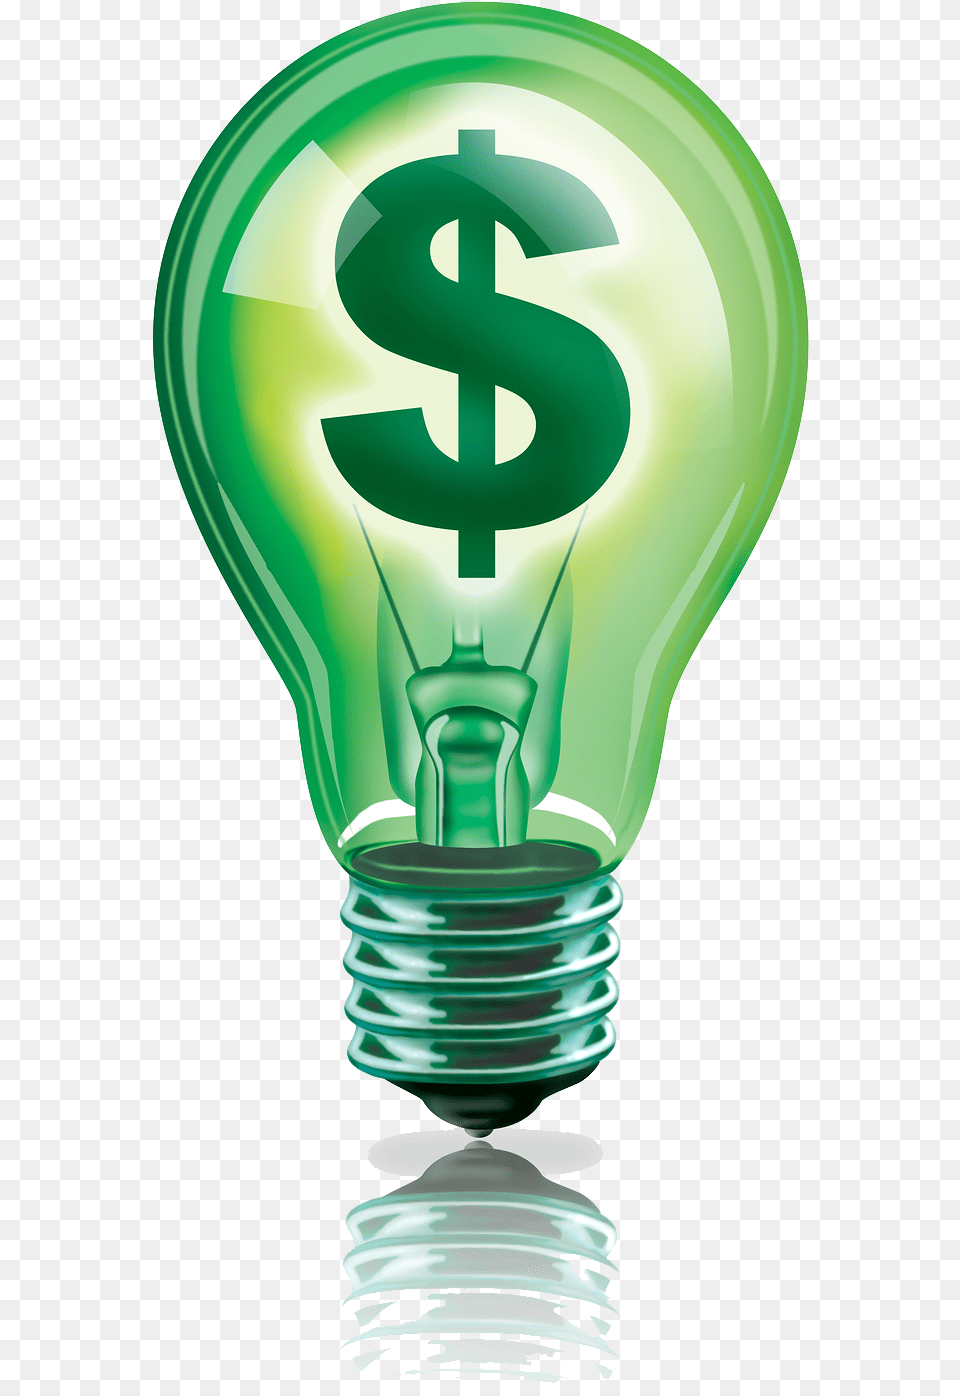 Download Electricity Images Light Bulb And Money, Lightbulb Free Transparent Png